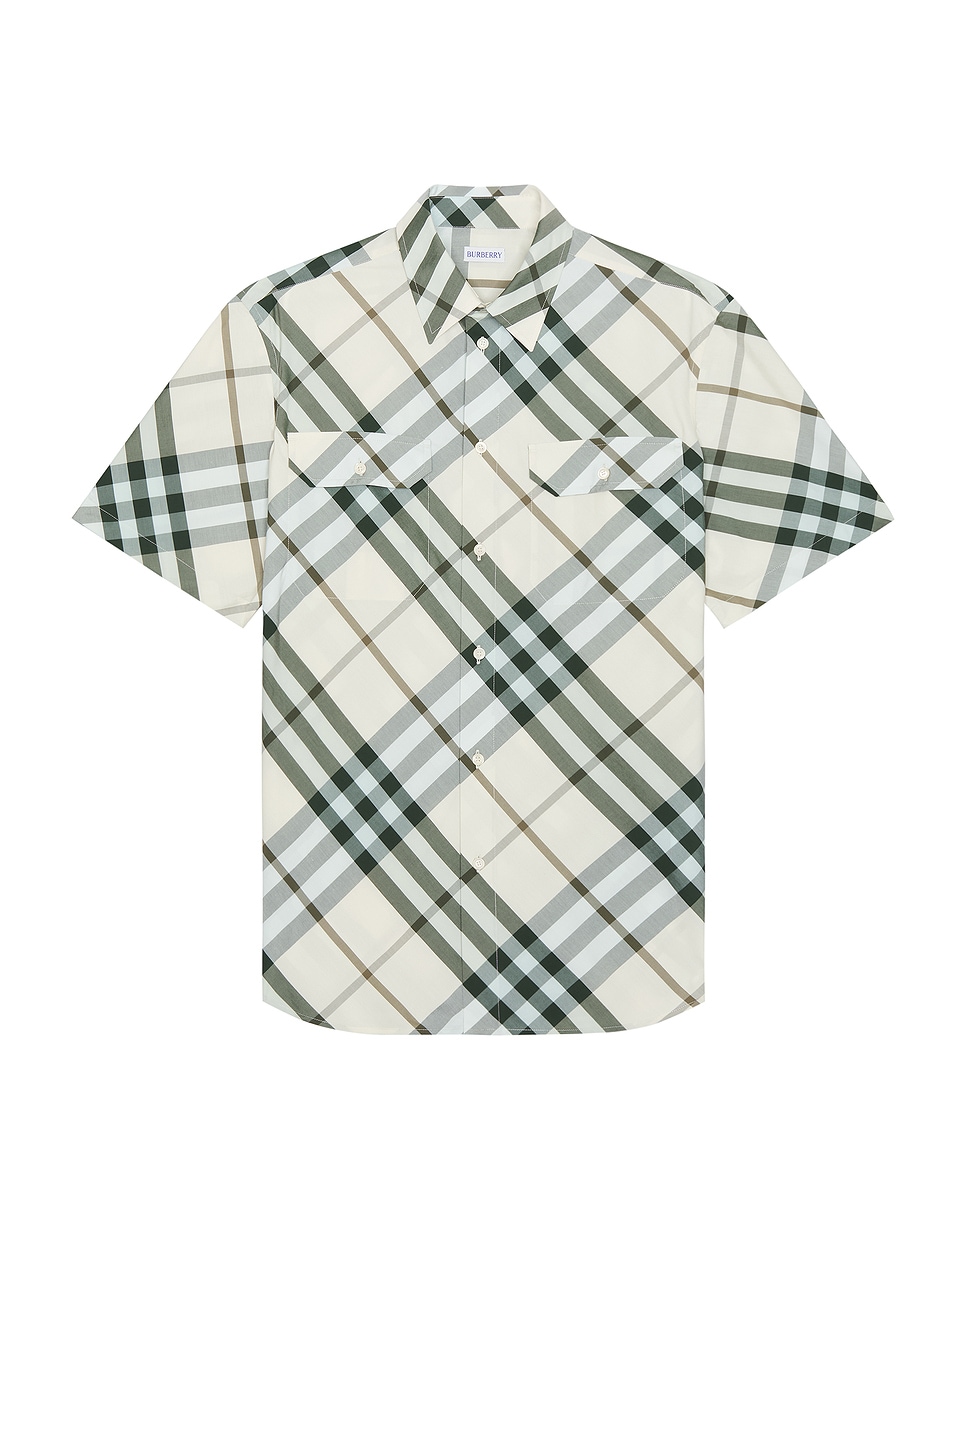 Image 1 of Burberry Shirt in Alabaster IP Check